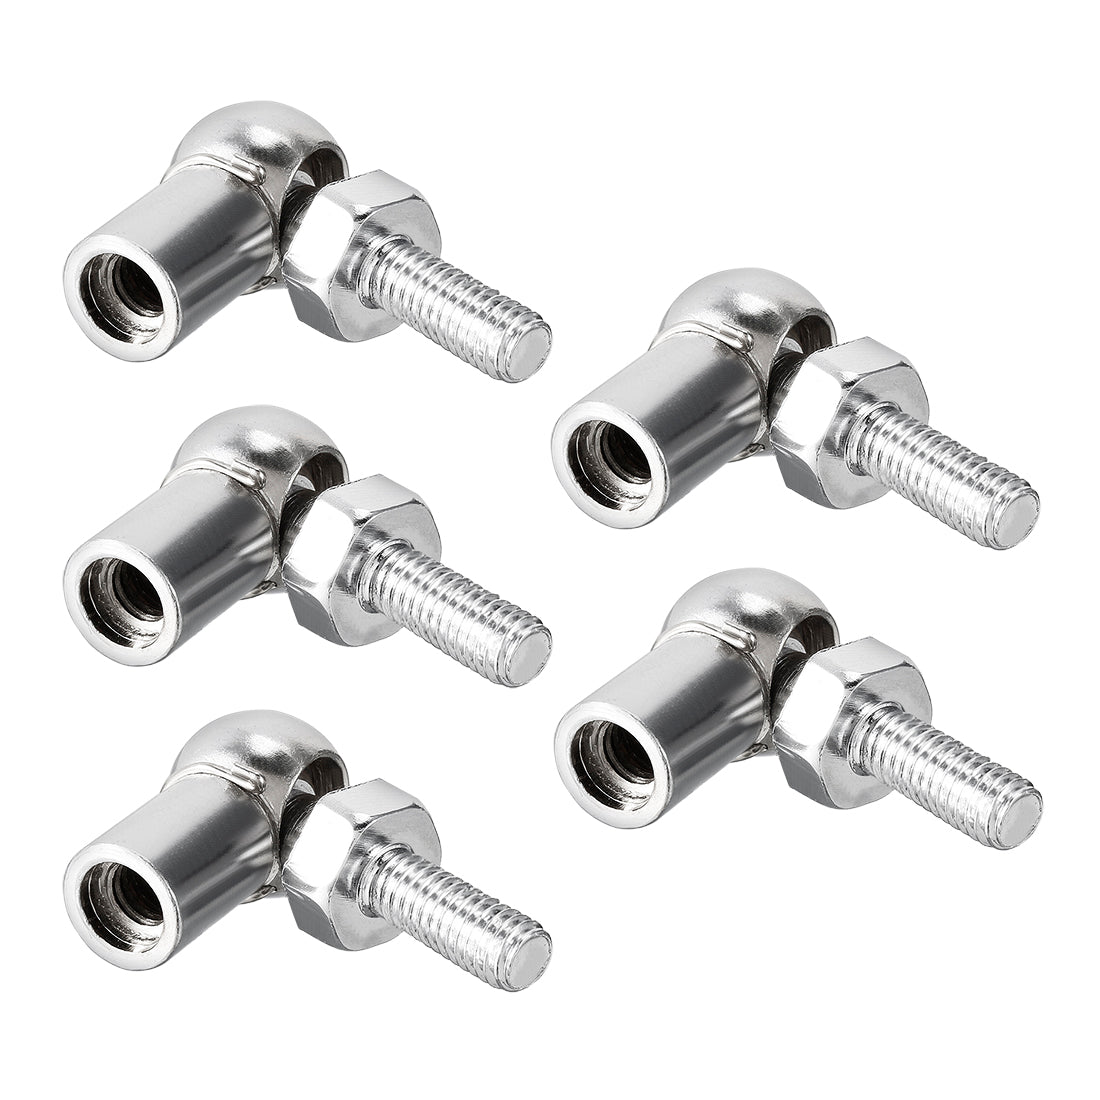 uxcell Uxcell Gas Spring End Fitting M6 Female Thread 6mm Round Handle Dia A3 Steel 5pcs